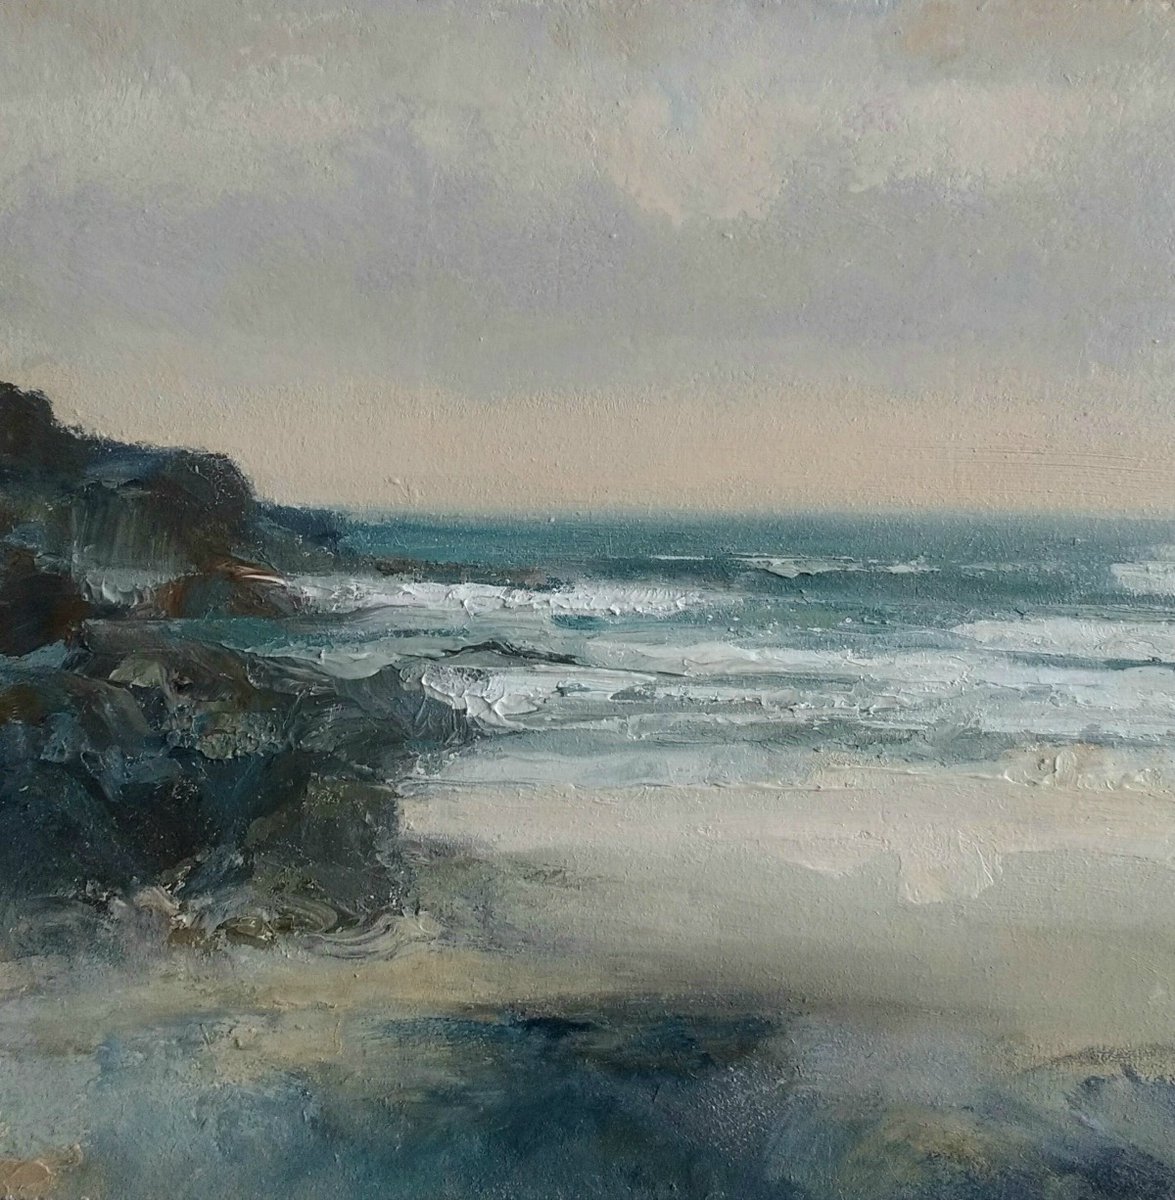 Currently at the framer's, so there's time to think of a title!! Oil on primed plywood, approx 25 x 25 cm.

#originalart #StIves #Seascape #oilpainting #PorthmeorBeach #Cornishartist #weather #autumn